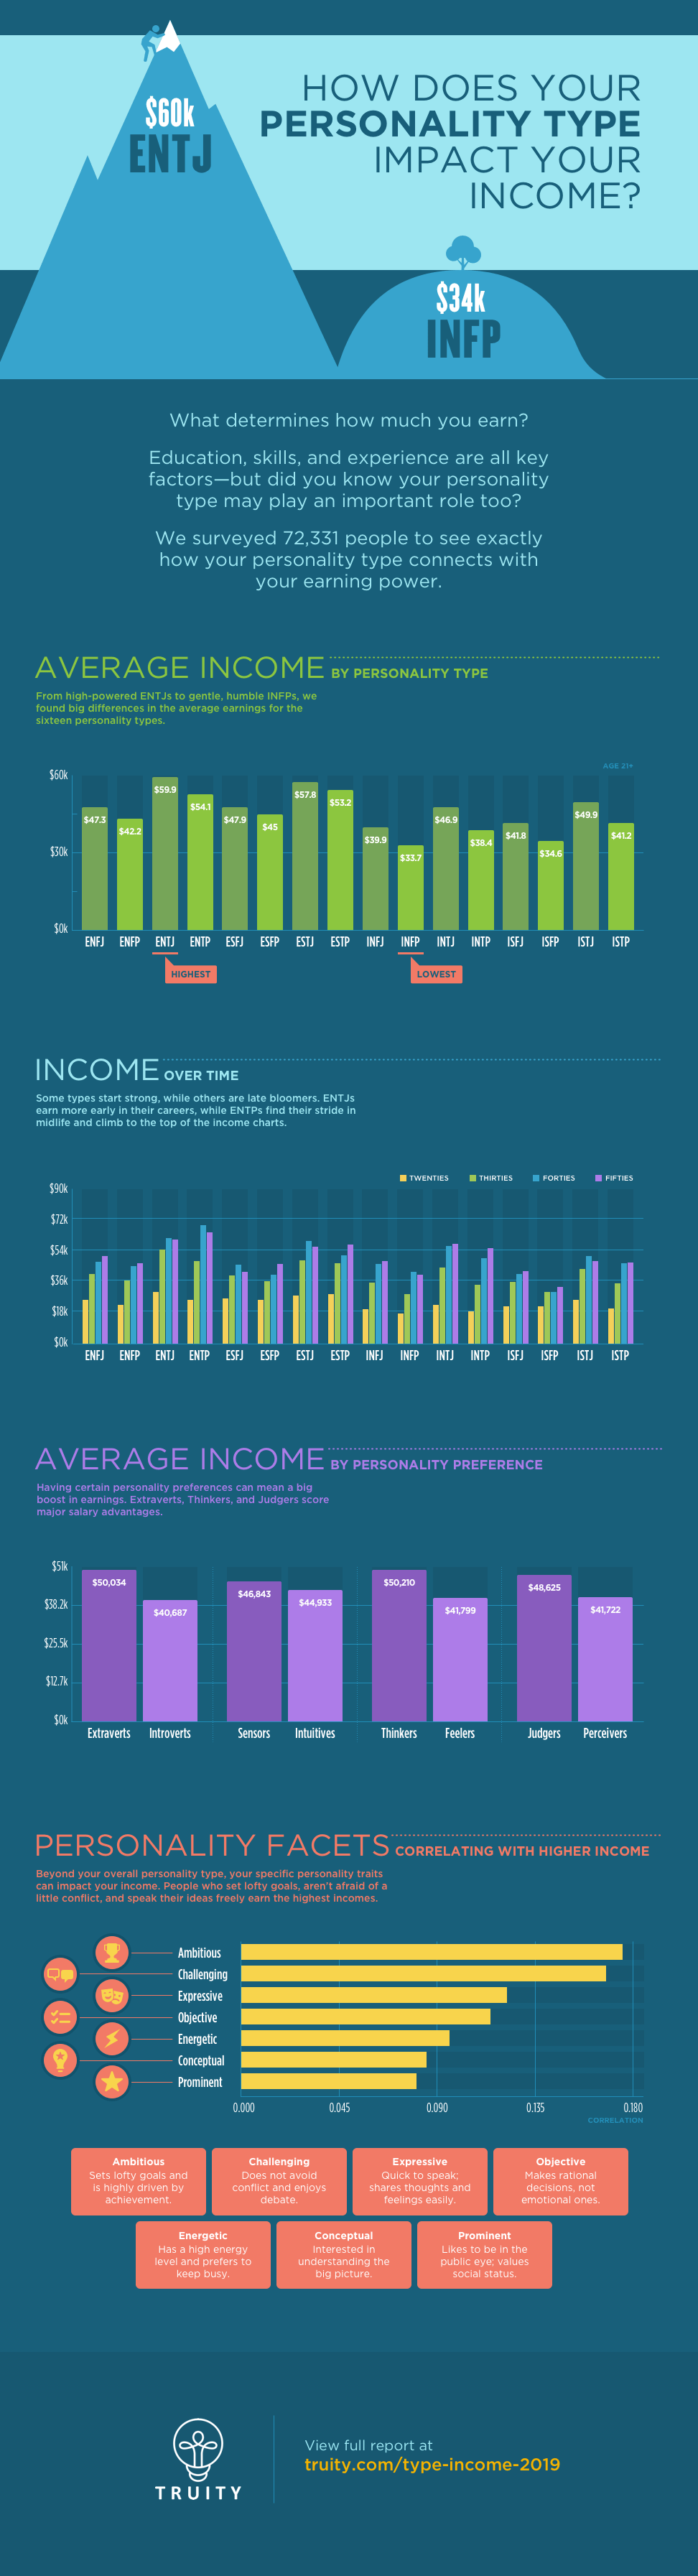 Myers Briggs Personality Type and Income